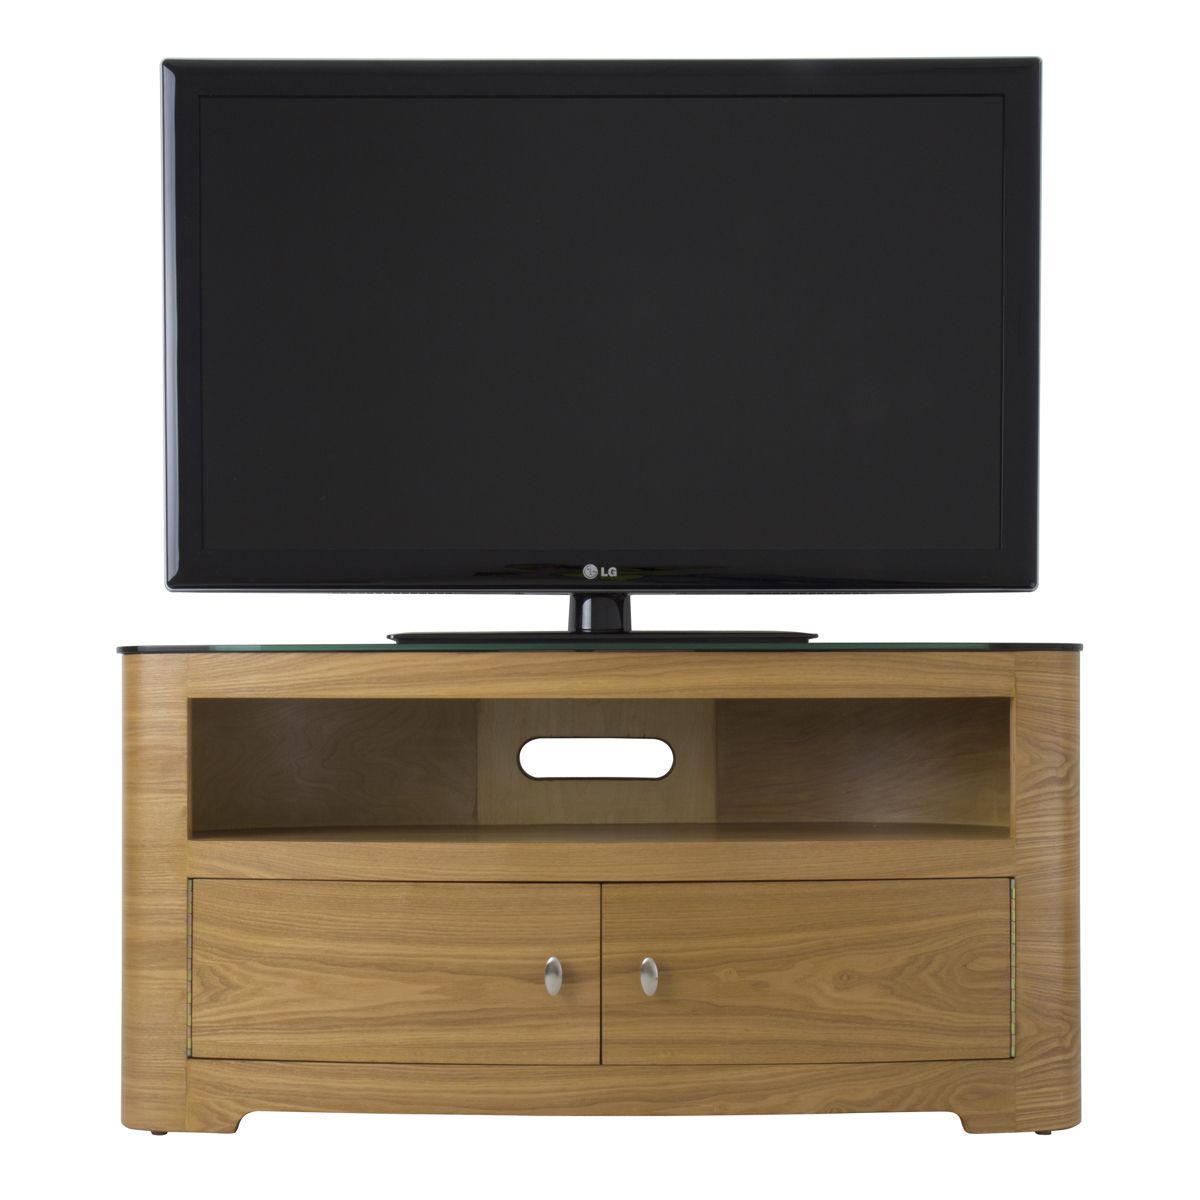 Large Oak Veneer Oval Lcd Plasma Tv Stand Cabinet 42+ Inch Within Oval Tv Stands (View 12 of 15)